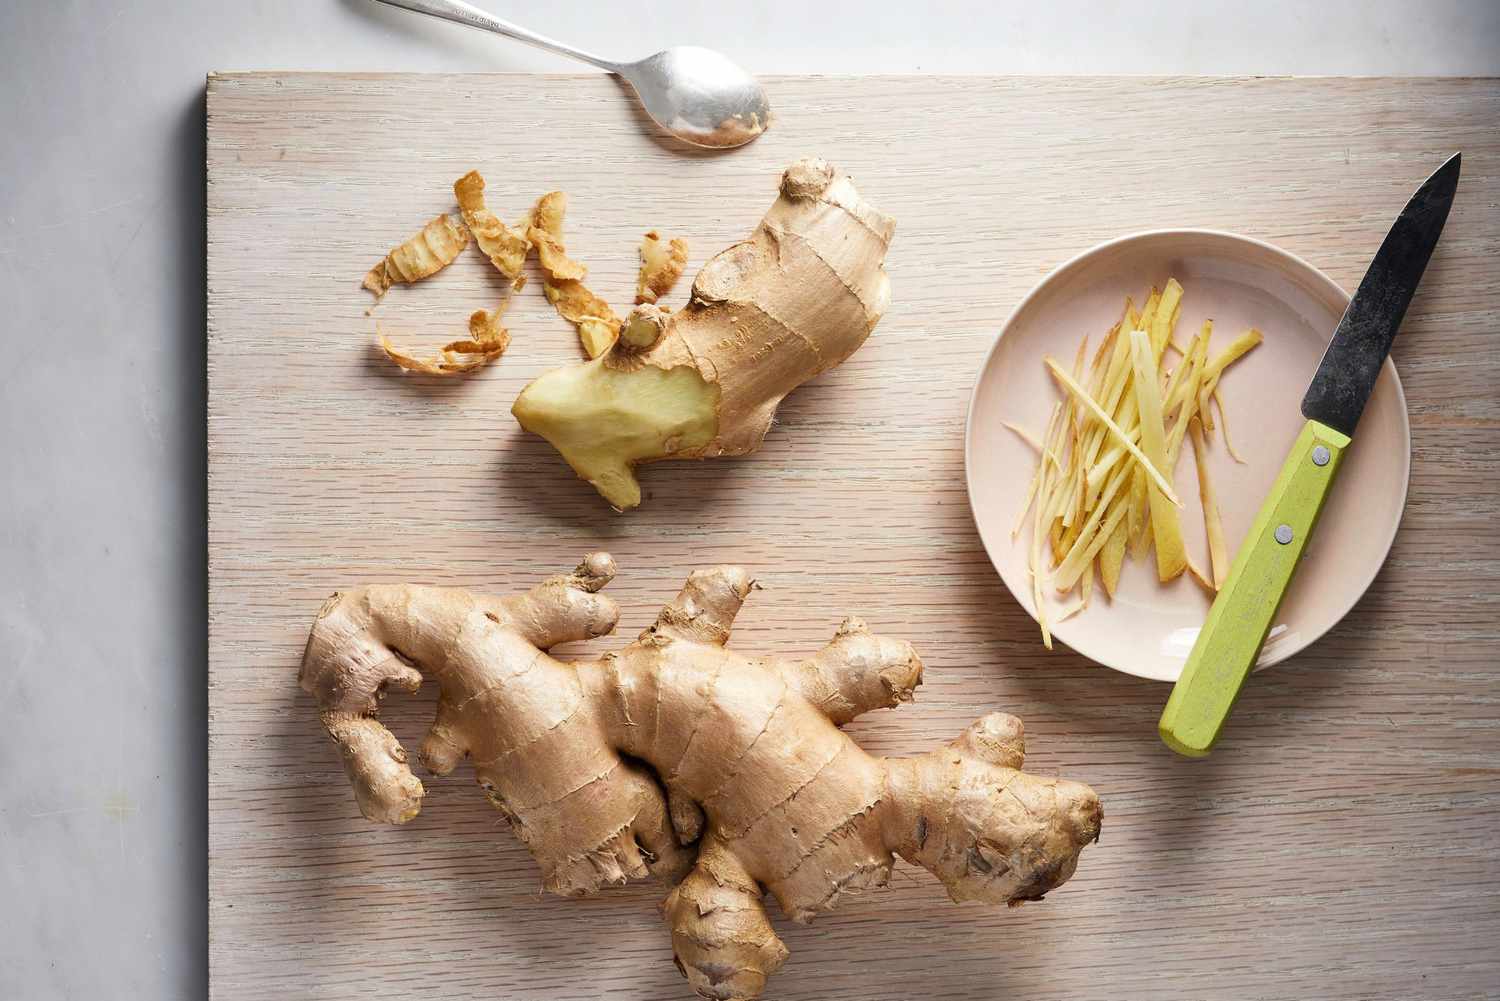 Ginger Is a Superfood You Should Always Have in Your Kitchen—Here's How to Store and Cook With It